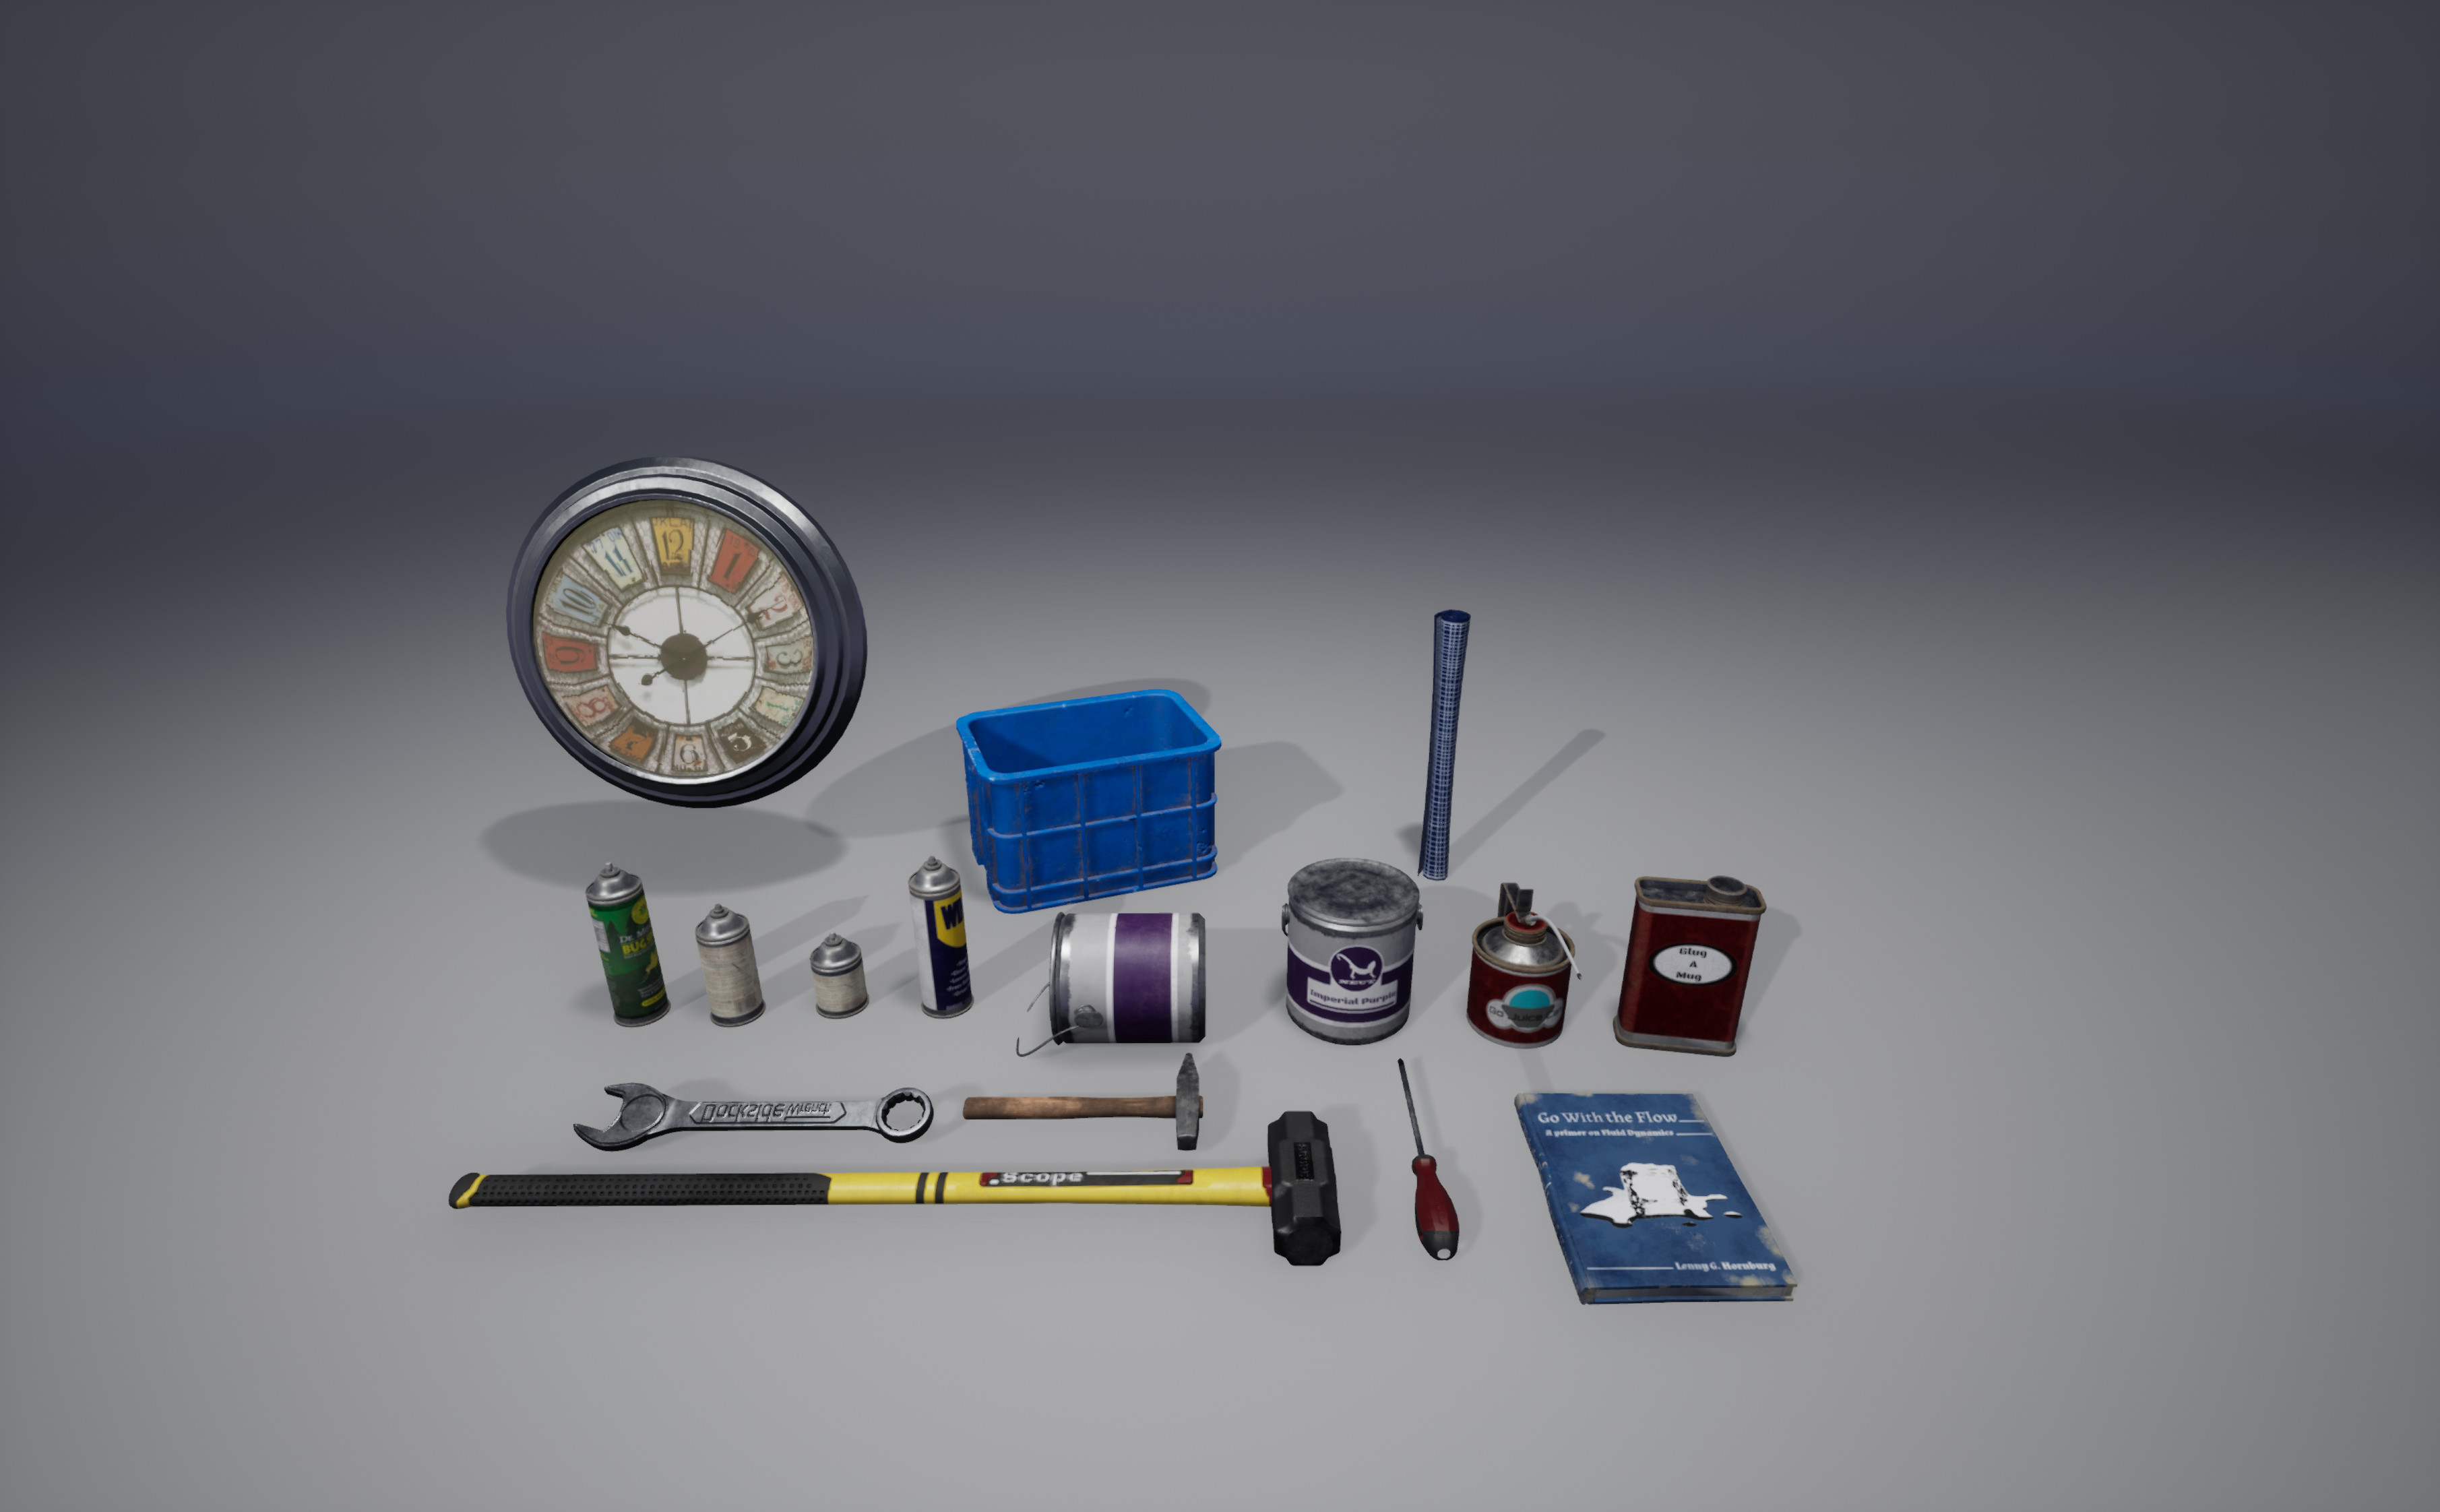 The smaller assets and props of the scene. Cans, buckets and paint all used the same base mesh, with a variety of texture swaps.